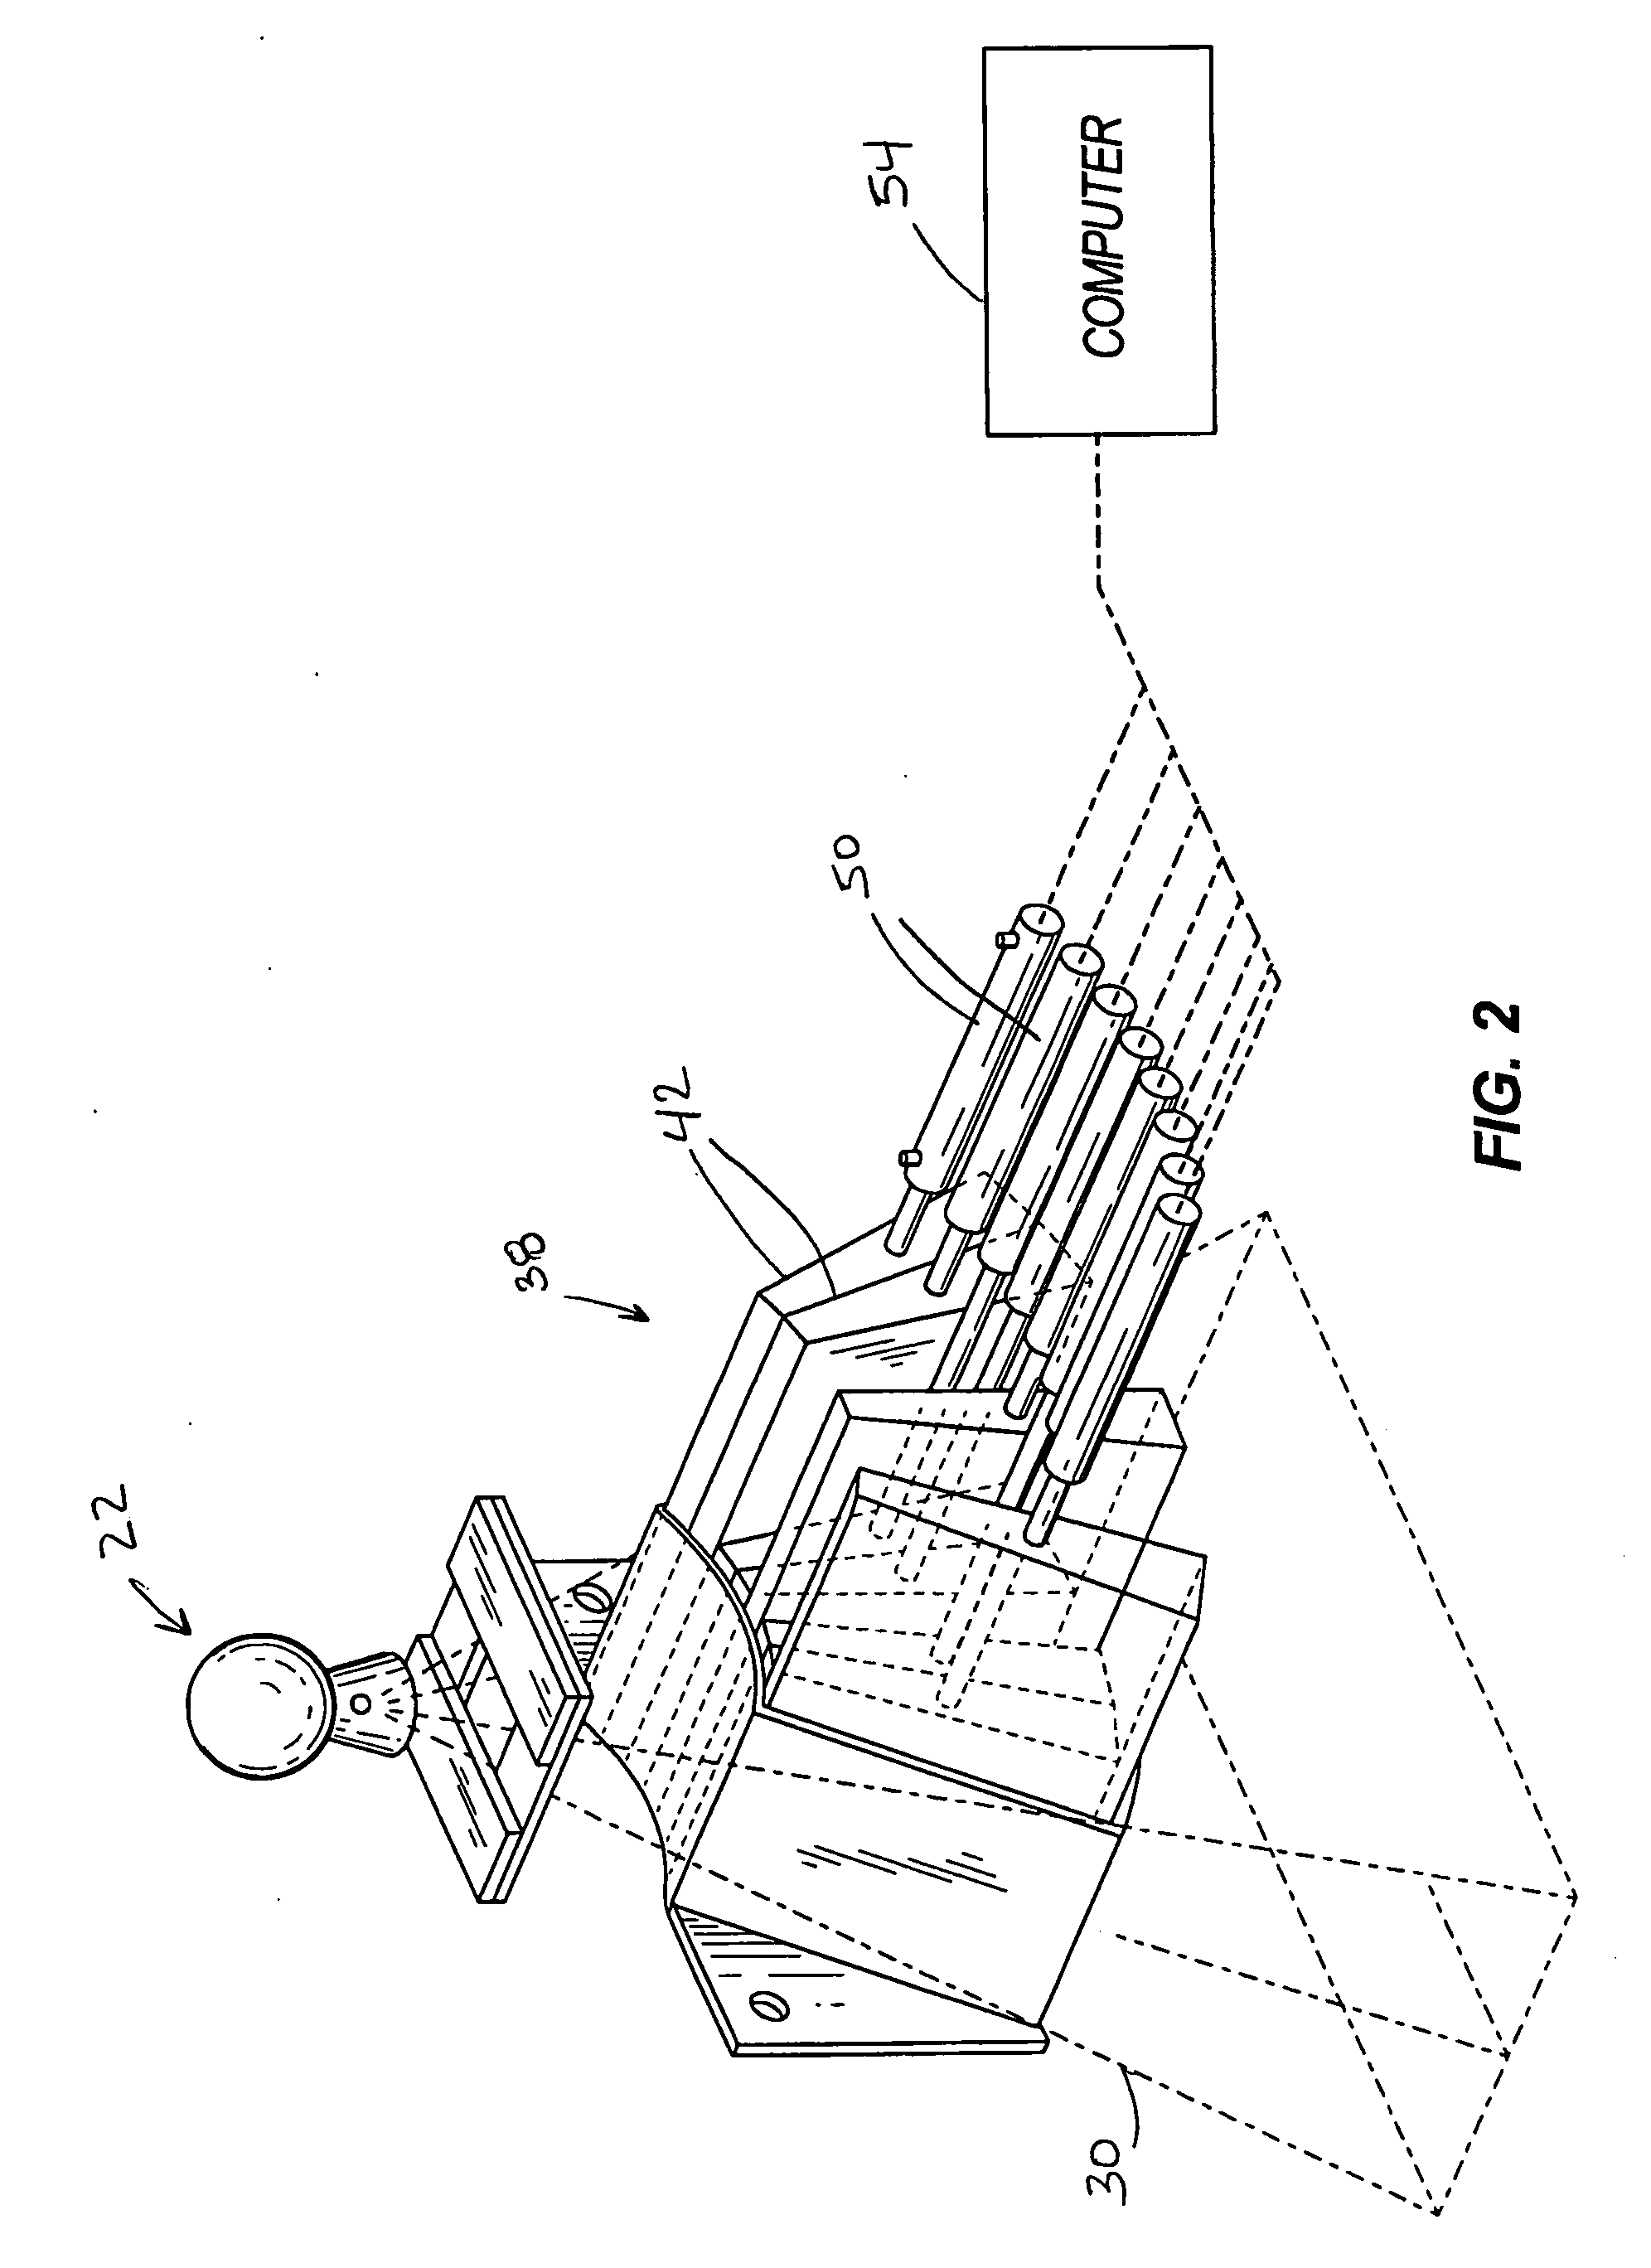 System and method of treating a patient with radiation therapy